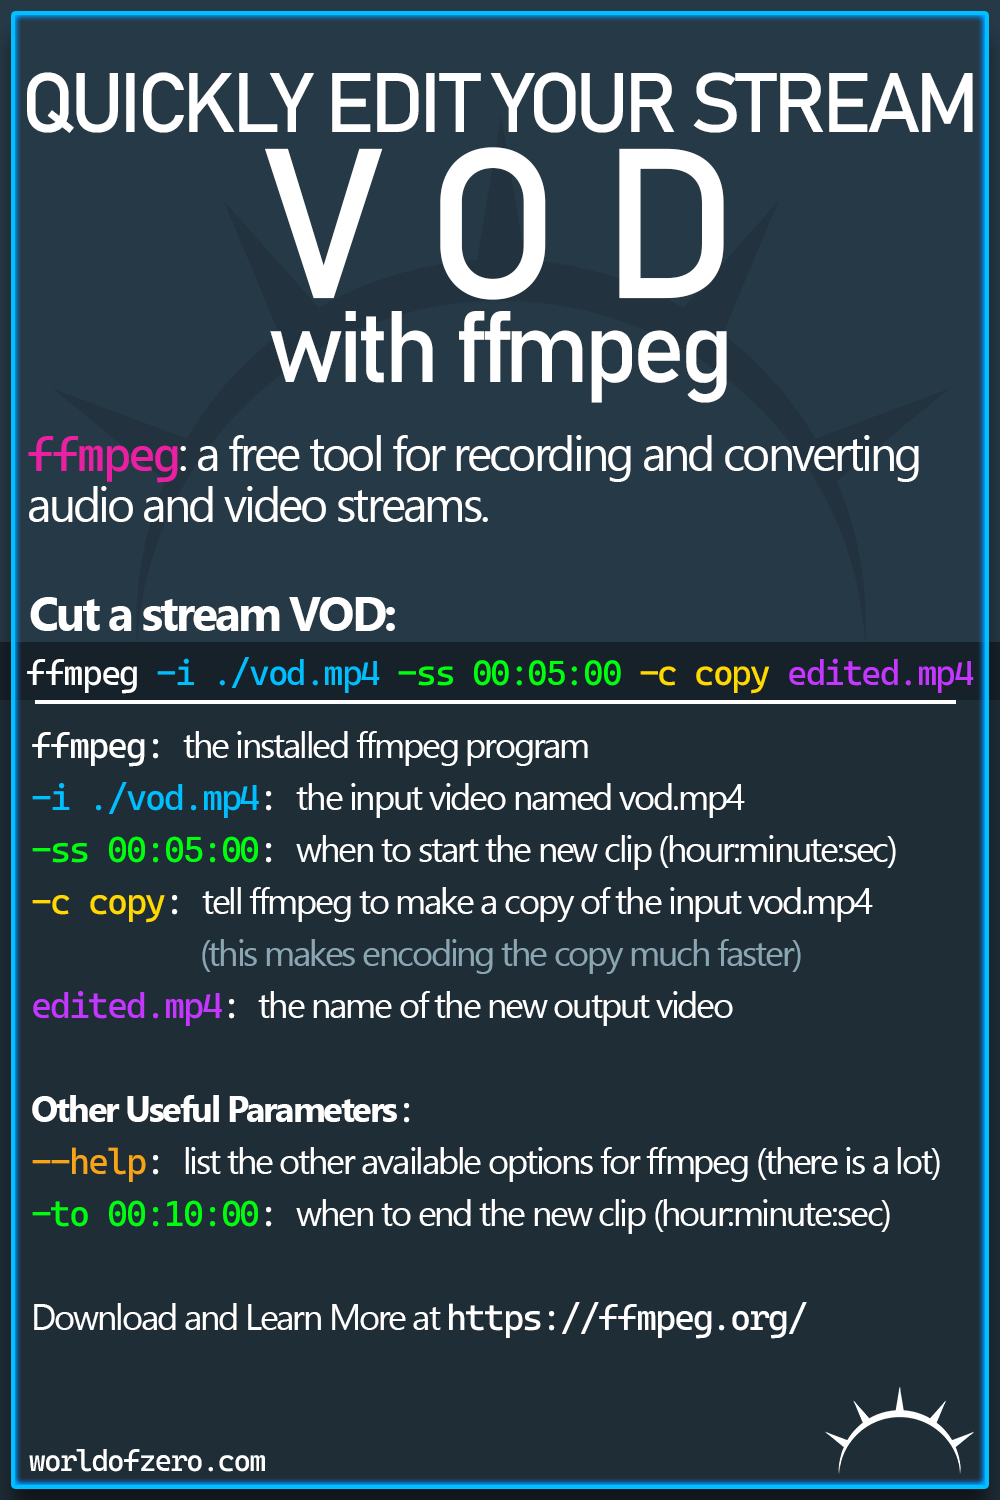 Using FFmpeg to edit stream vods